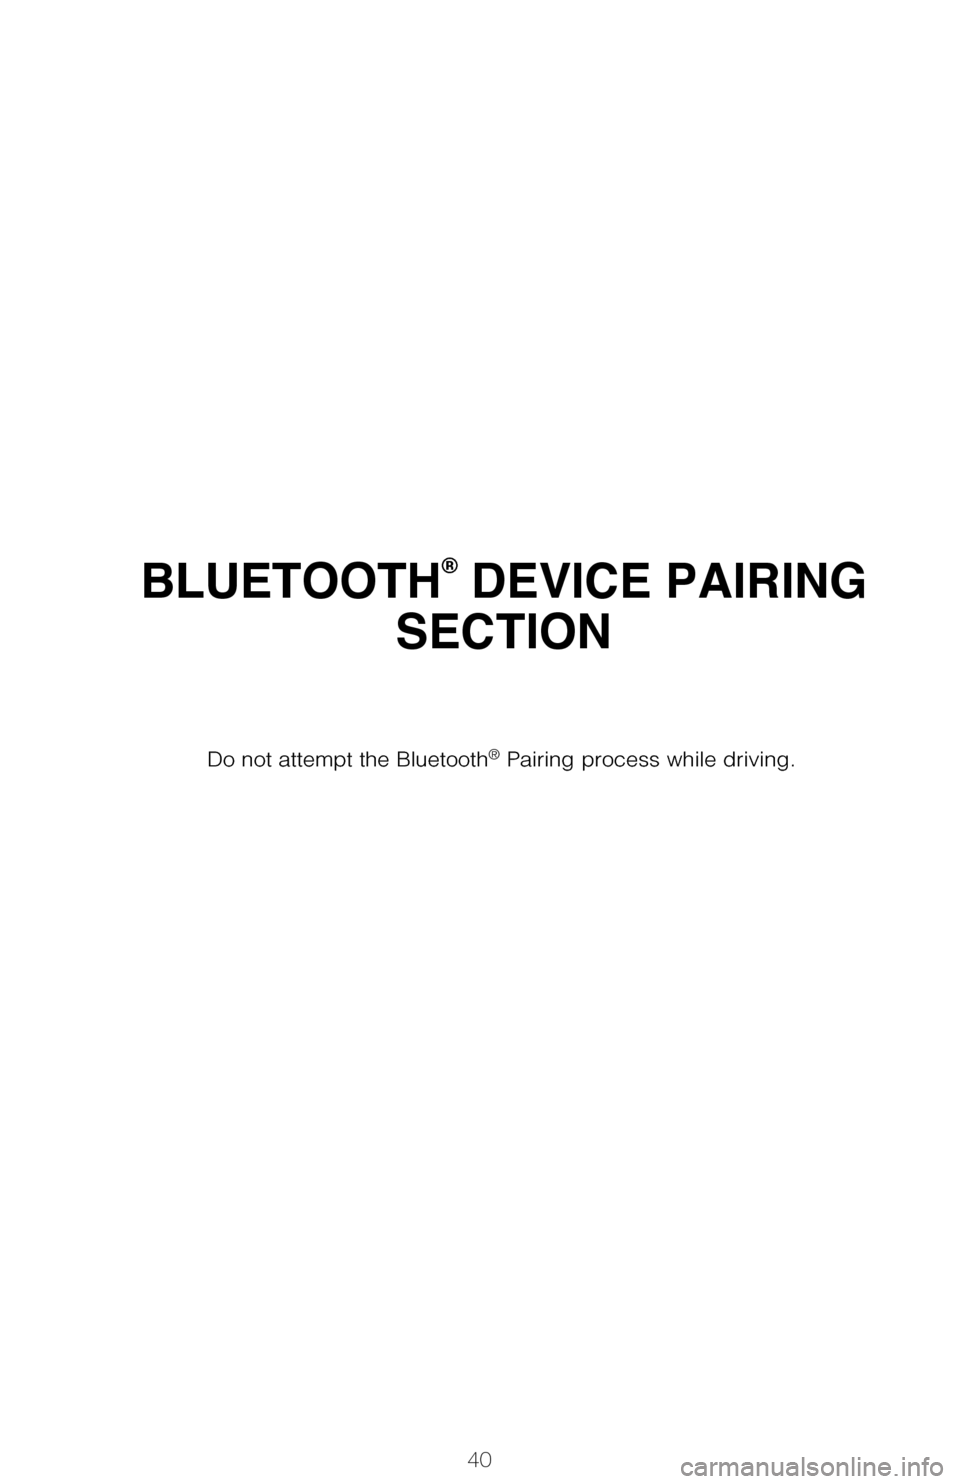 TOYOTA RAV4 2017 XA40 / 4.G Quick Reference Guide 40
BLUETOOTH® DEVICE PAIRING 
SECTION
Do not attempt the Bluetooth® Pairing process while driving.
106464_2017_RAV4_QRG_D5_R1.indd   409/22/16   8:40 AM 